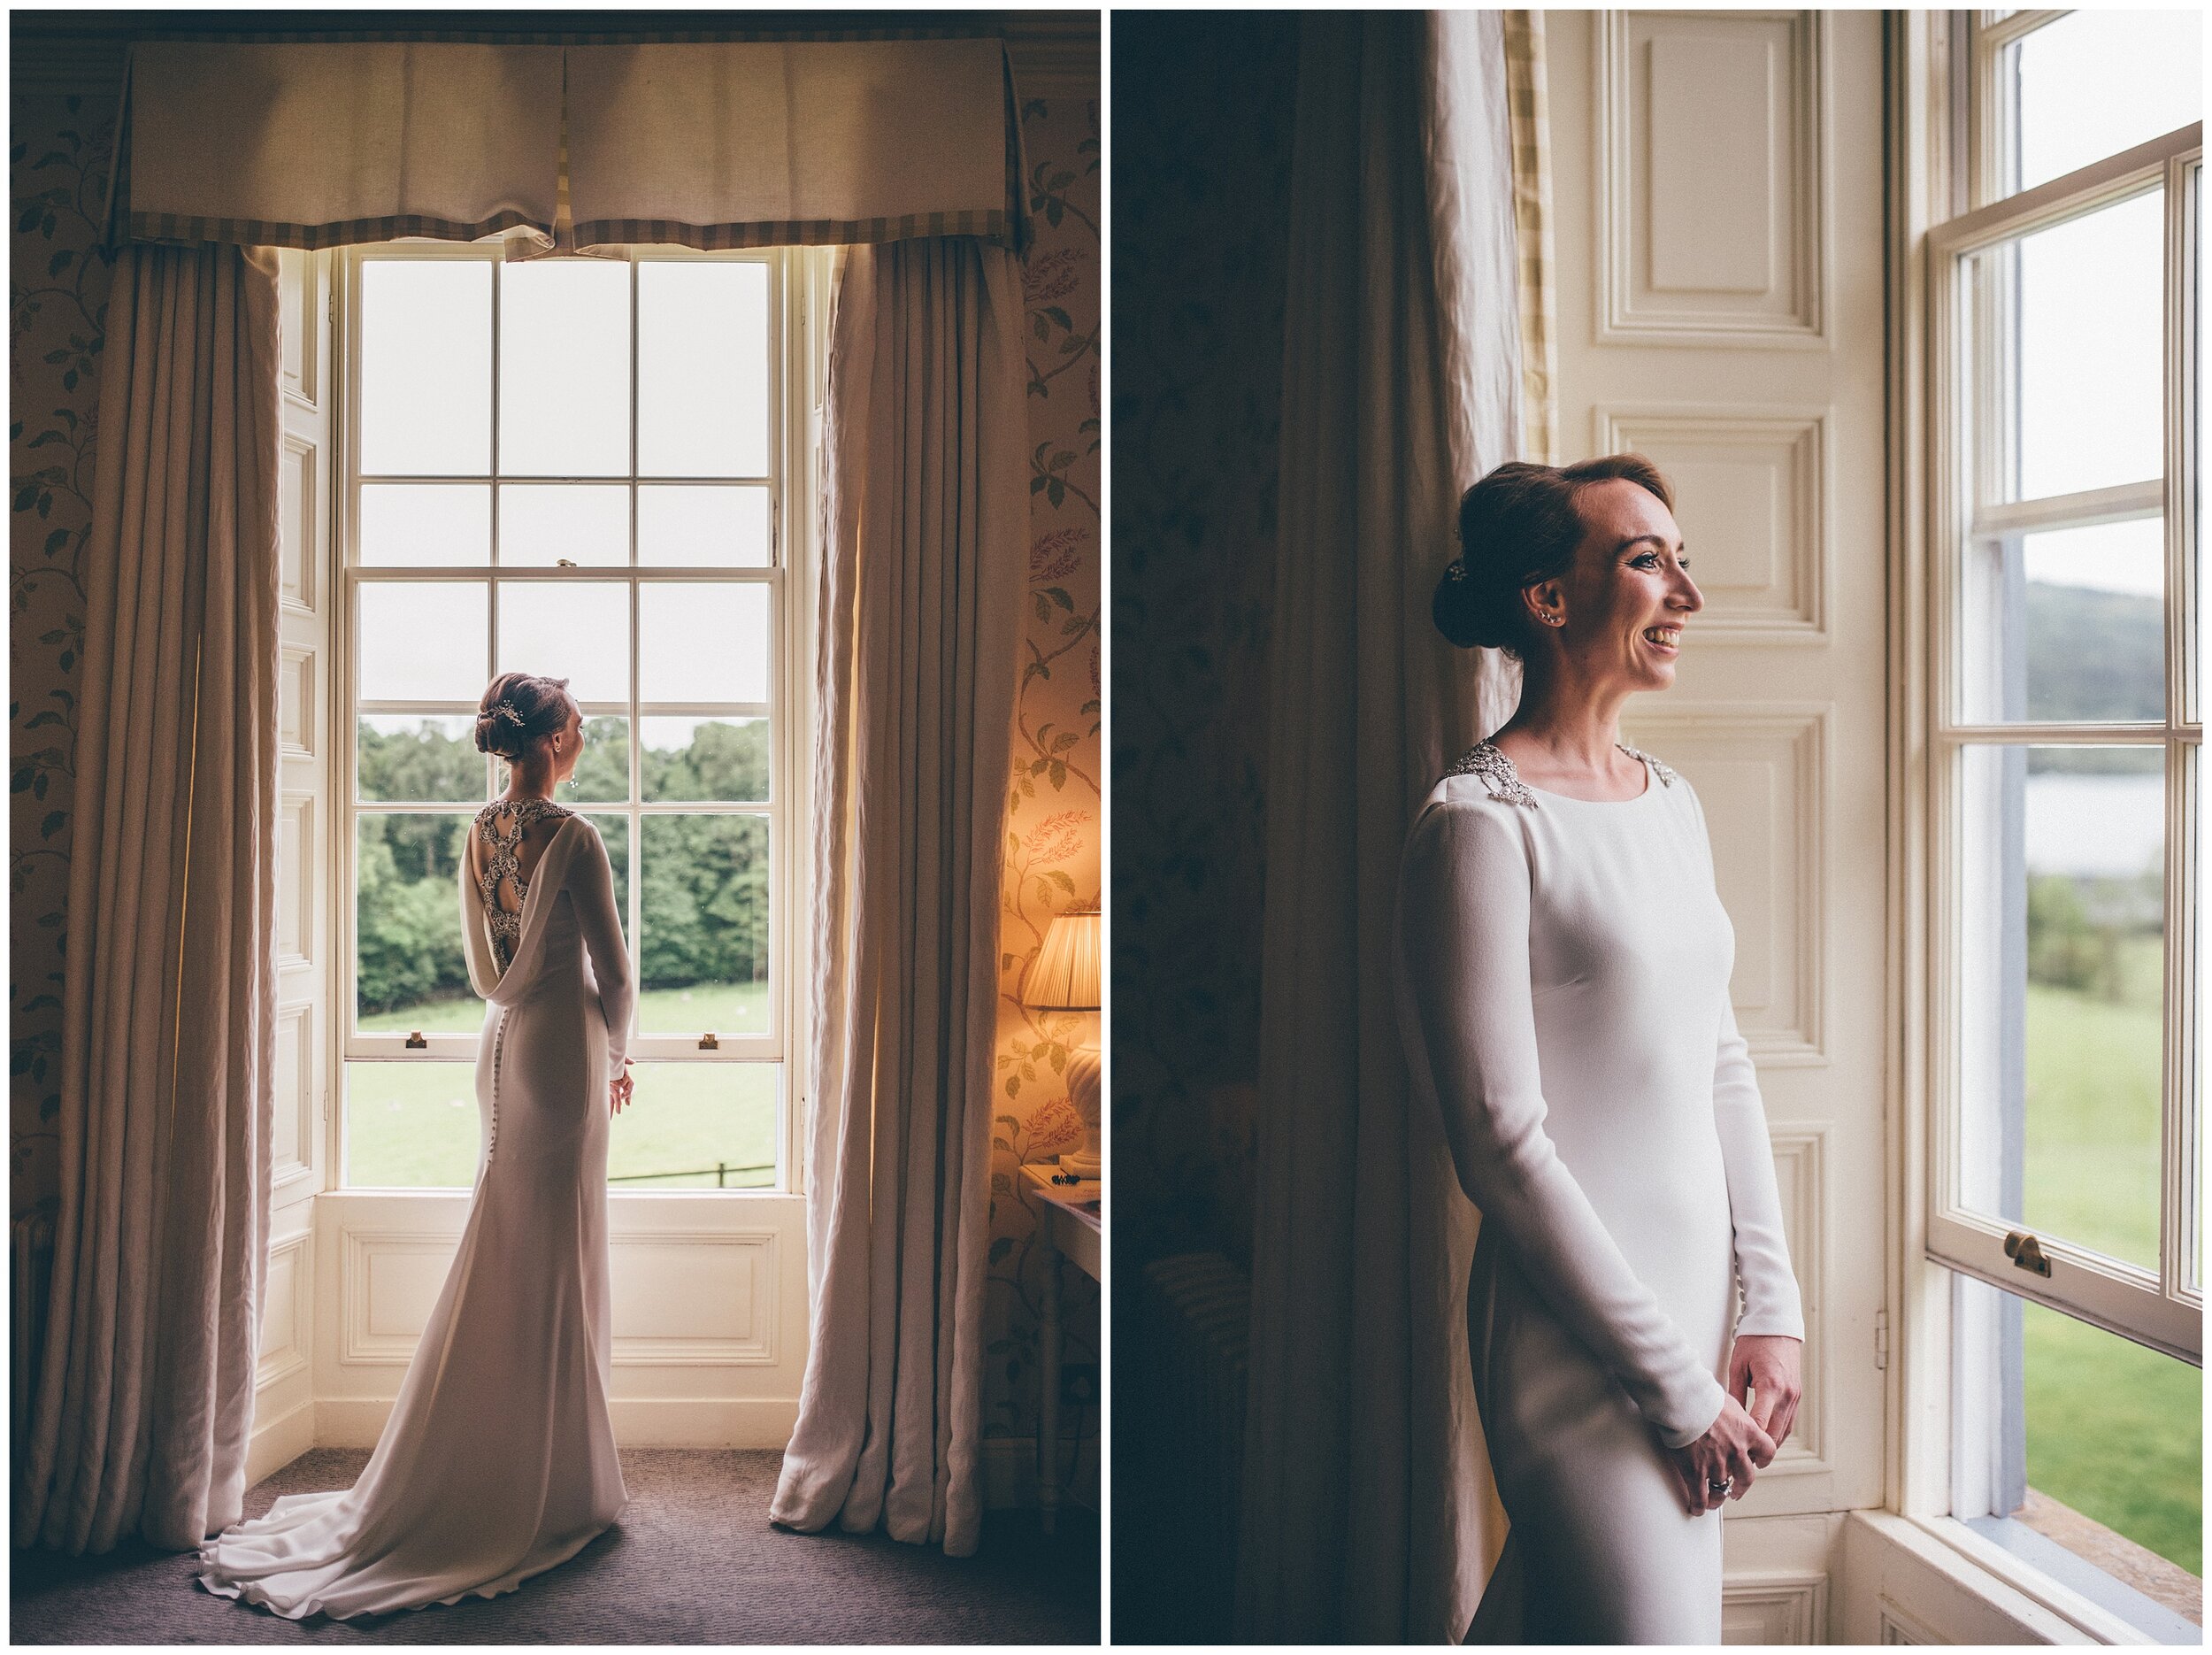 Stunning bride in her Pronovias wedding gown ahead of her wedding at Siverholme Manor in the Lake District.